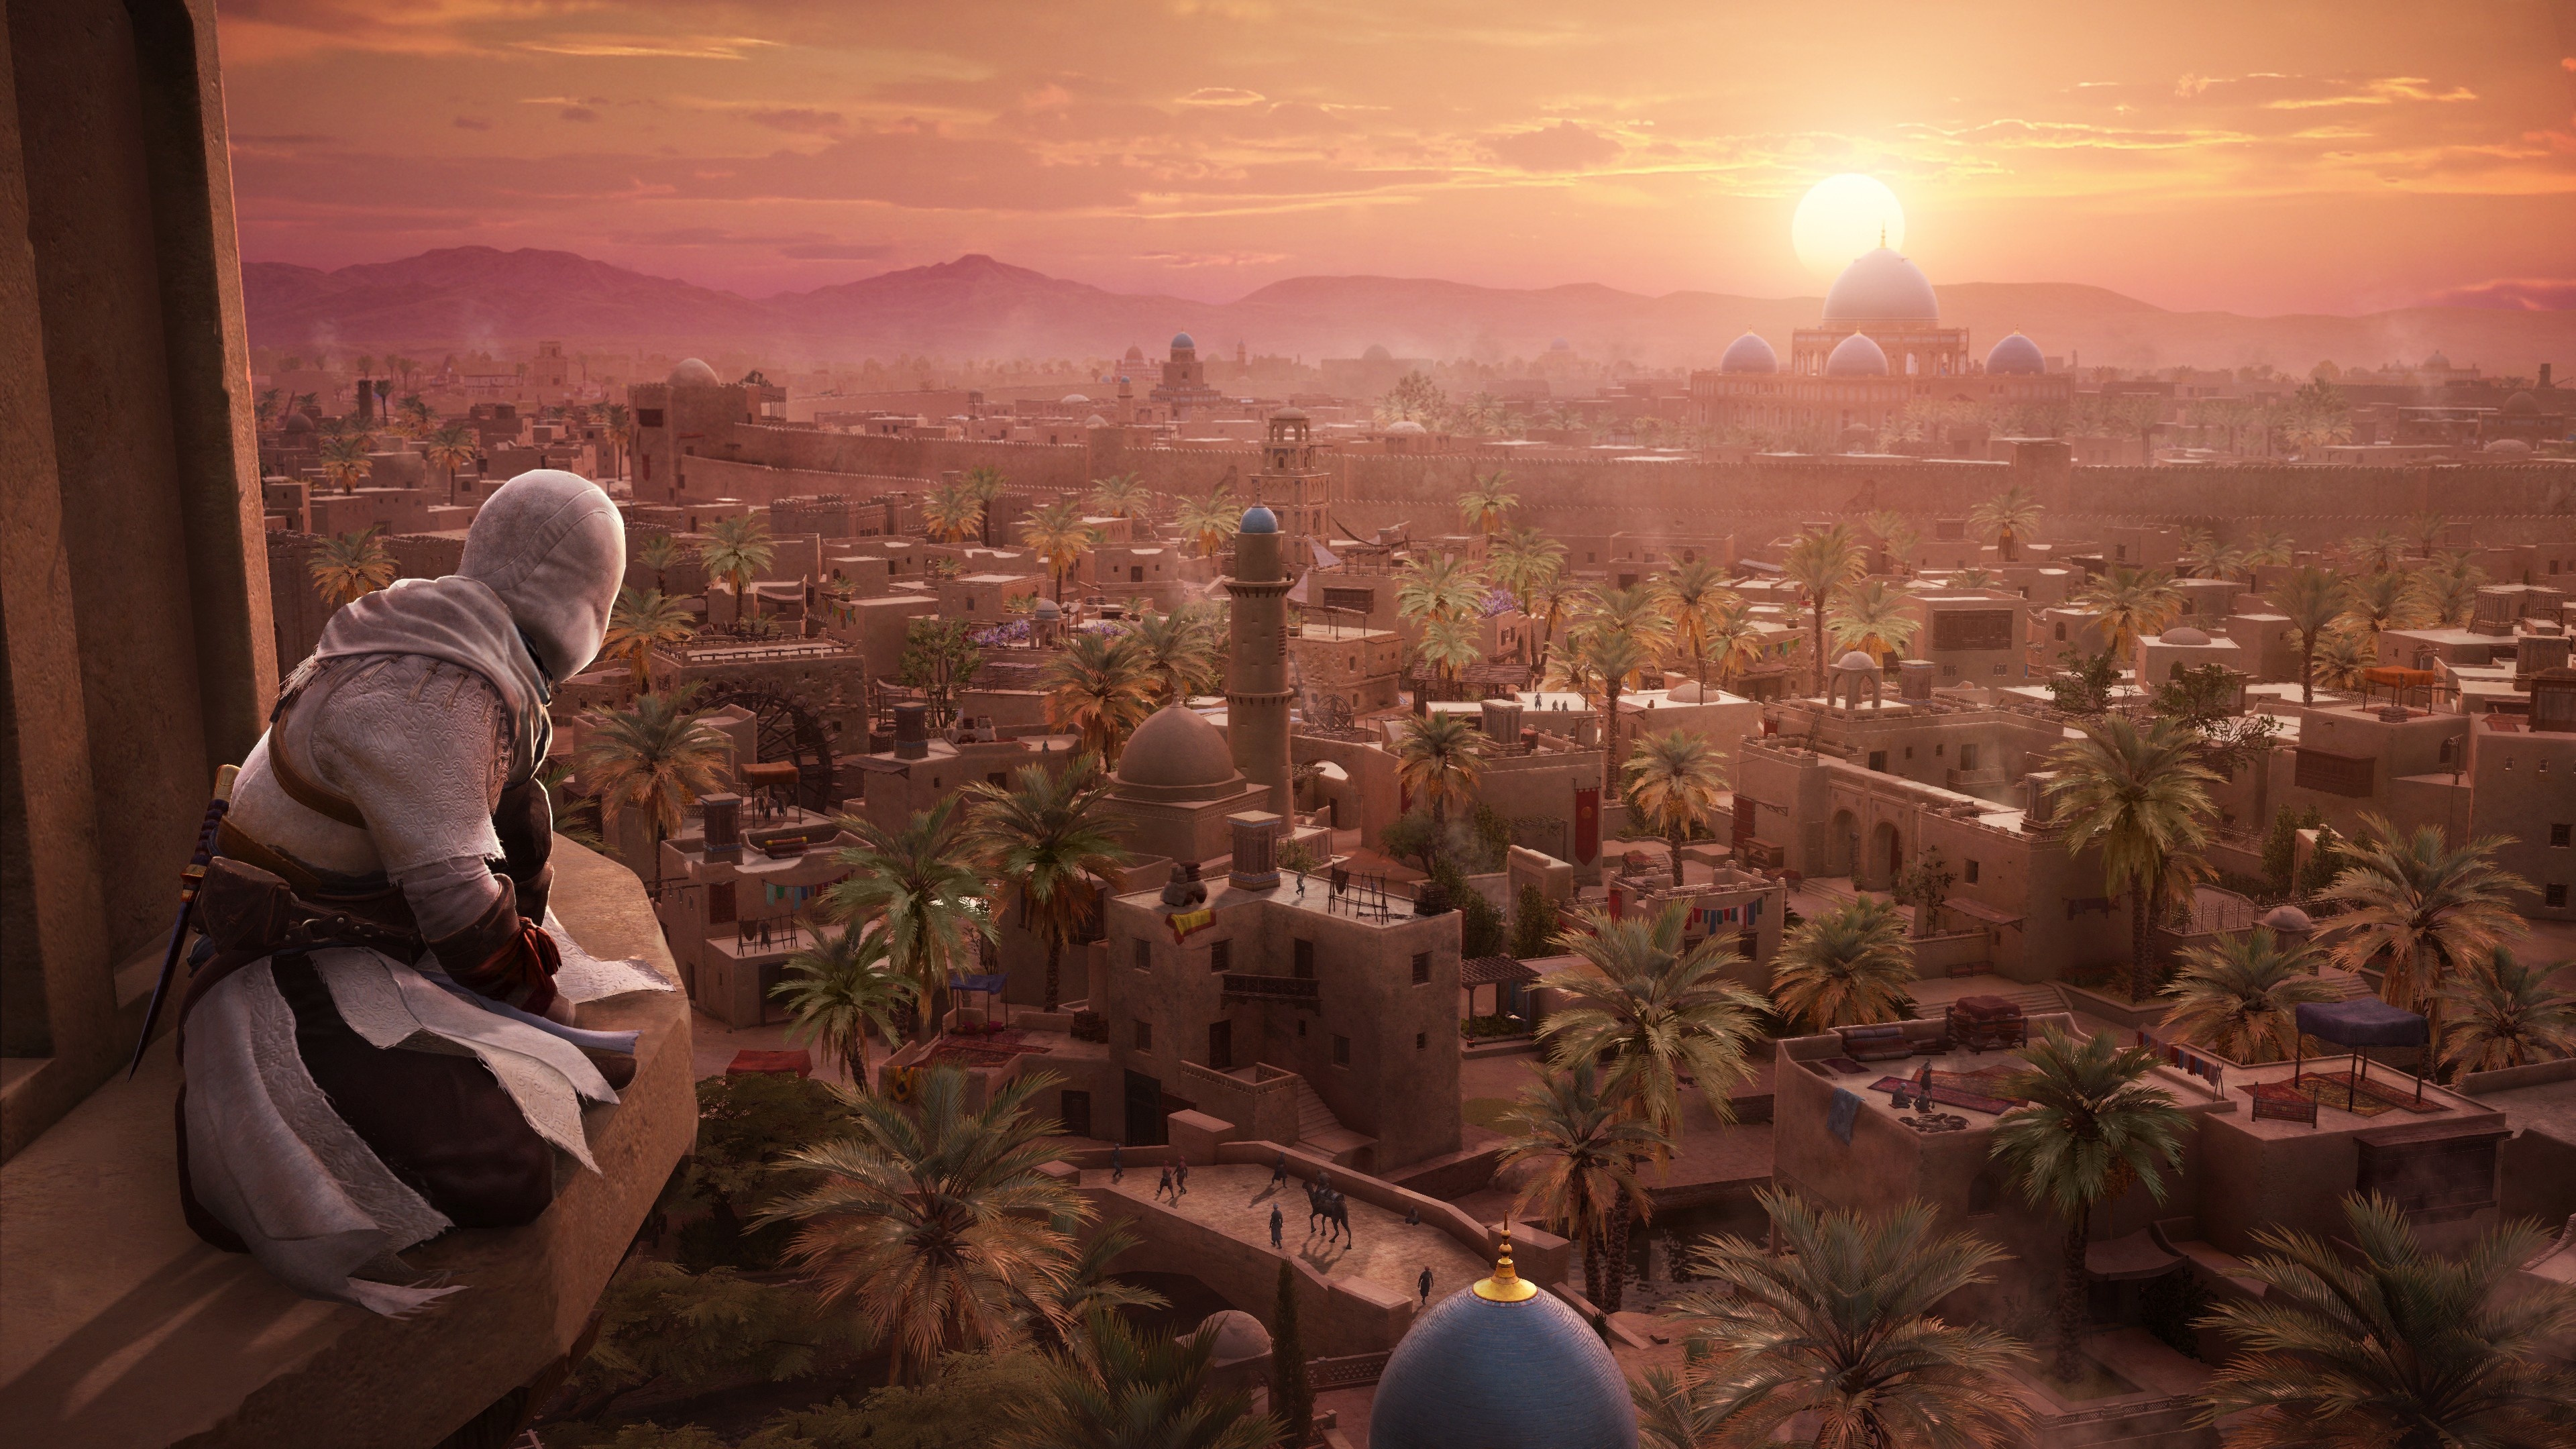 (Only one city, but more lively and immersive: Ubisoft wants to focus on the essentials in Assassin's Creed Mirage.)